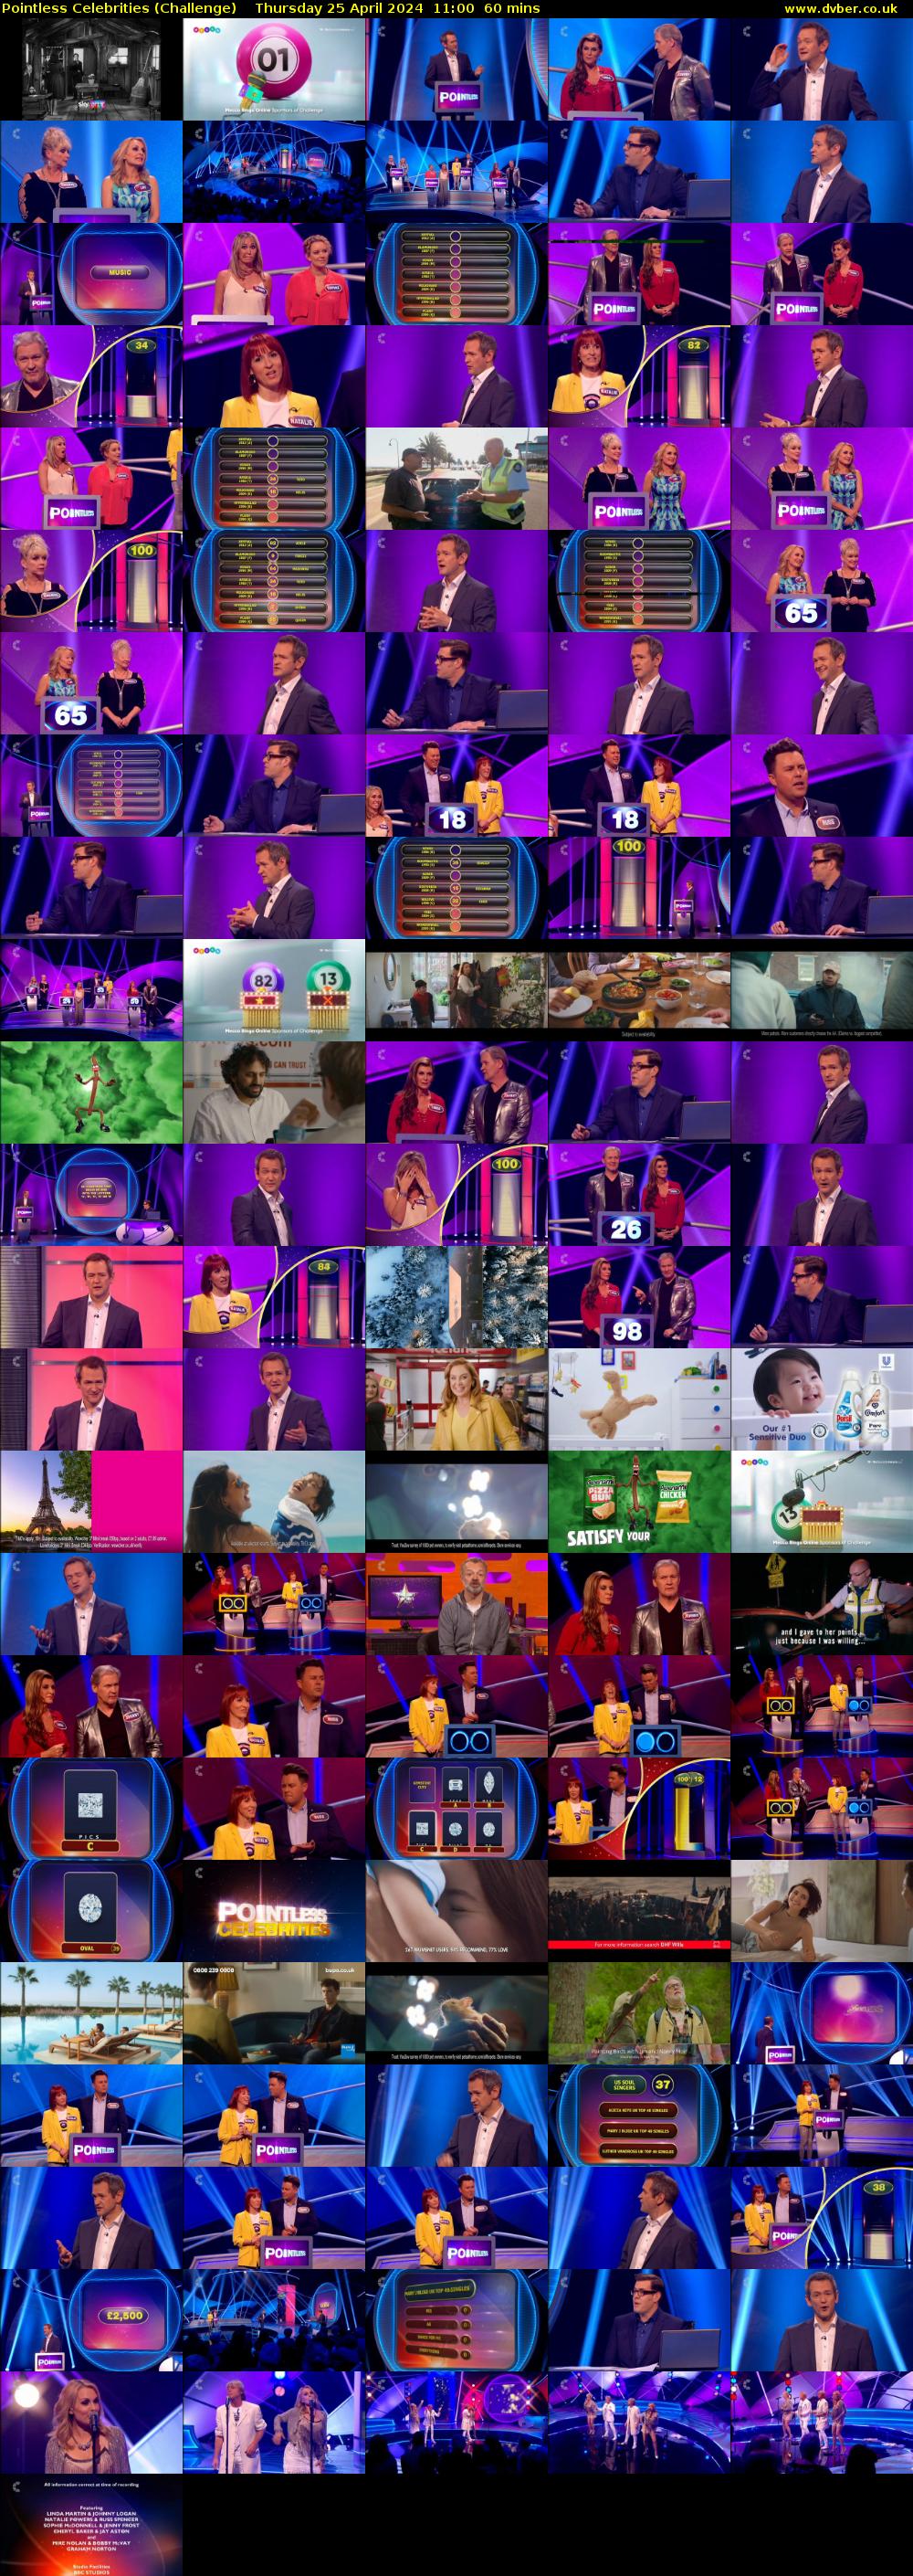 Pointless Celebrities (Challenge) Thursday 25 April 2024 11:00 - 12:00